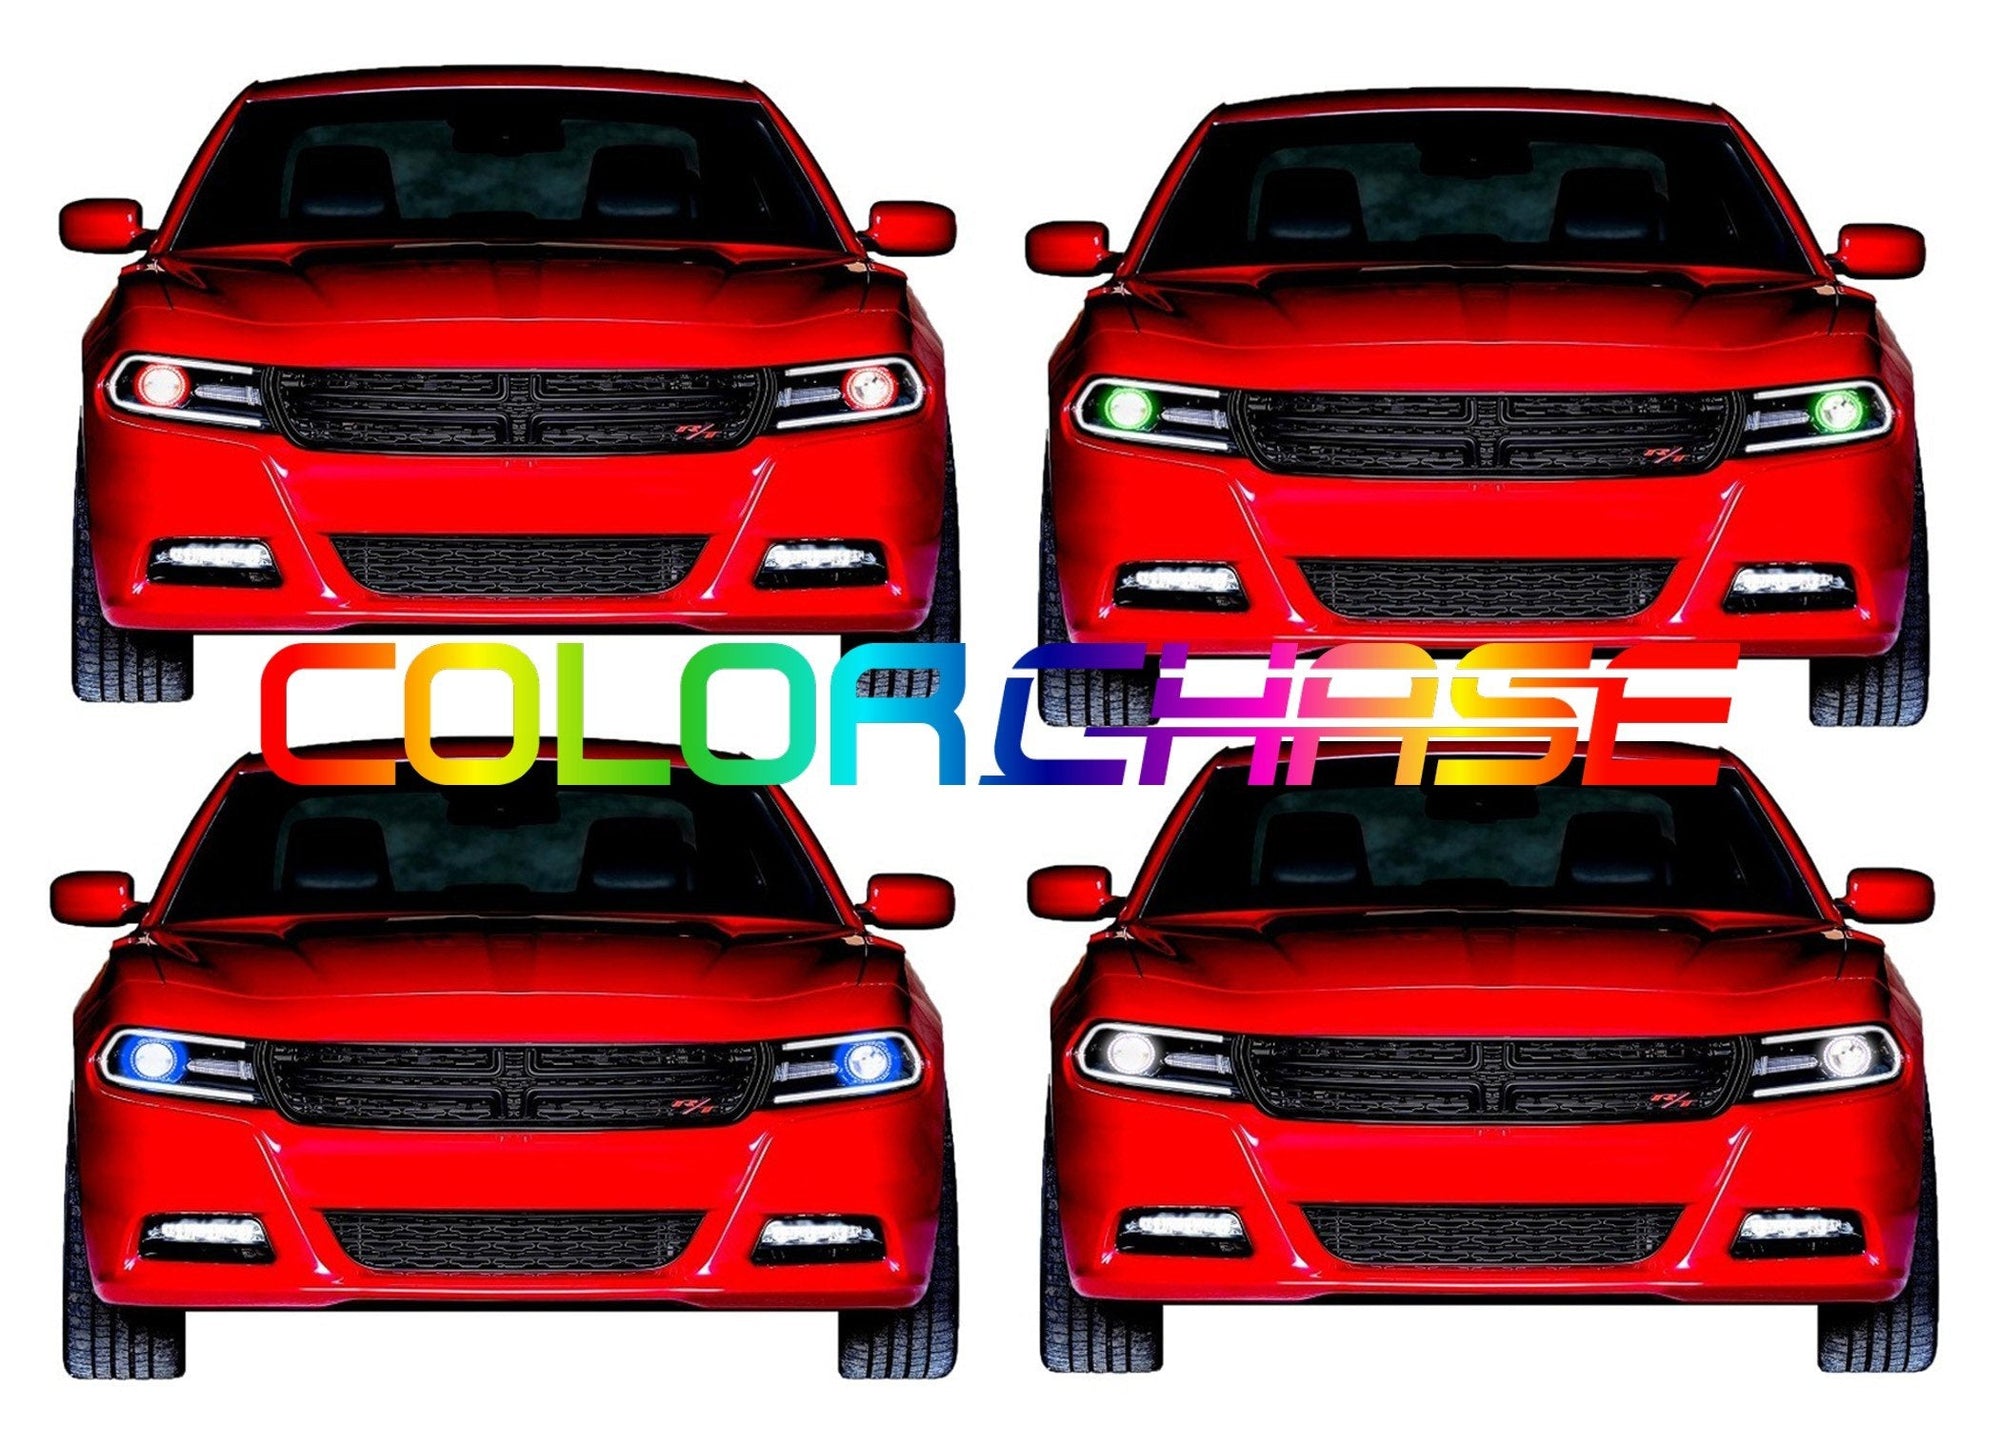 Dodge-Charger-2015, 2016, 2017, 2018, 2019-LED-Halo-Headlights-ColorChase-No Remote-DO-CR2015-CCH